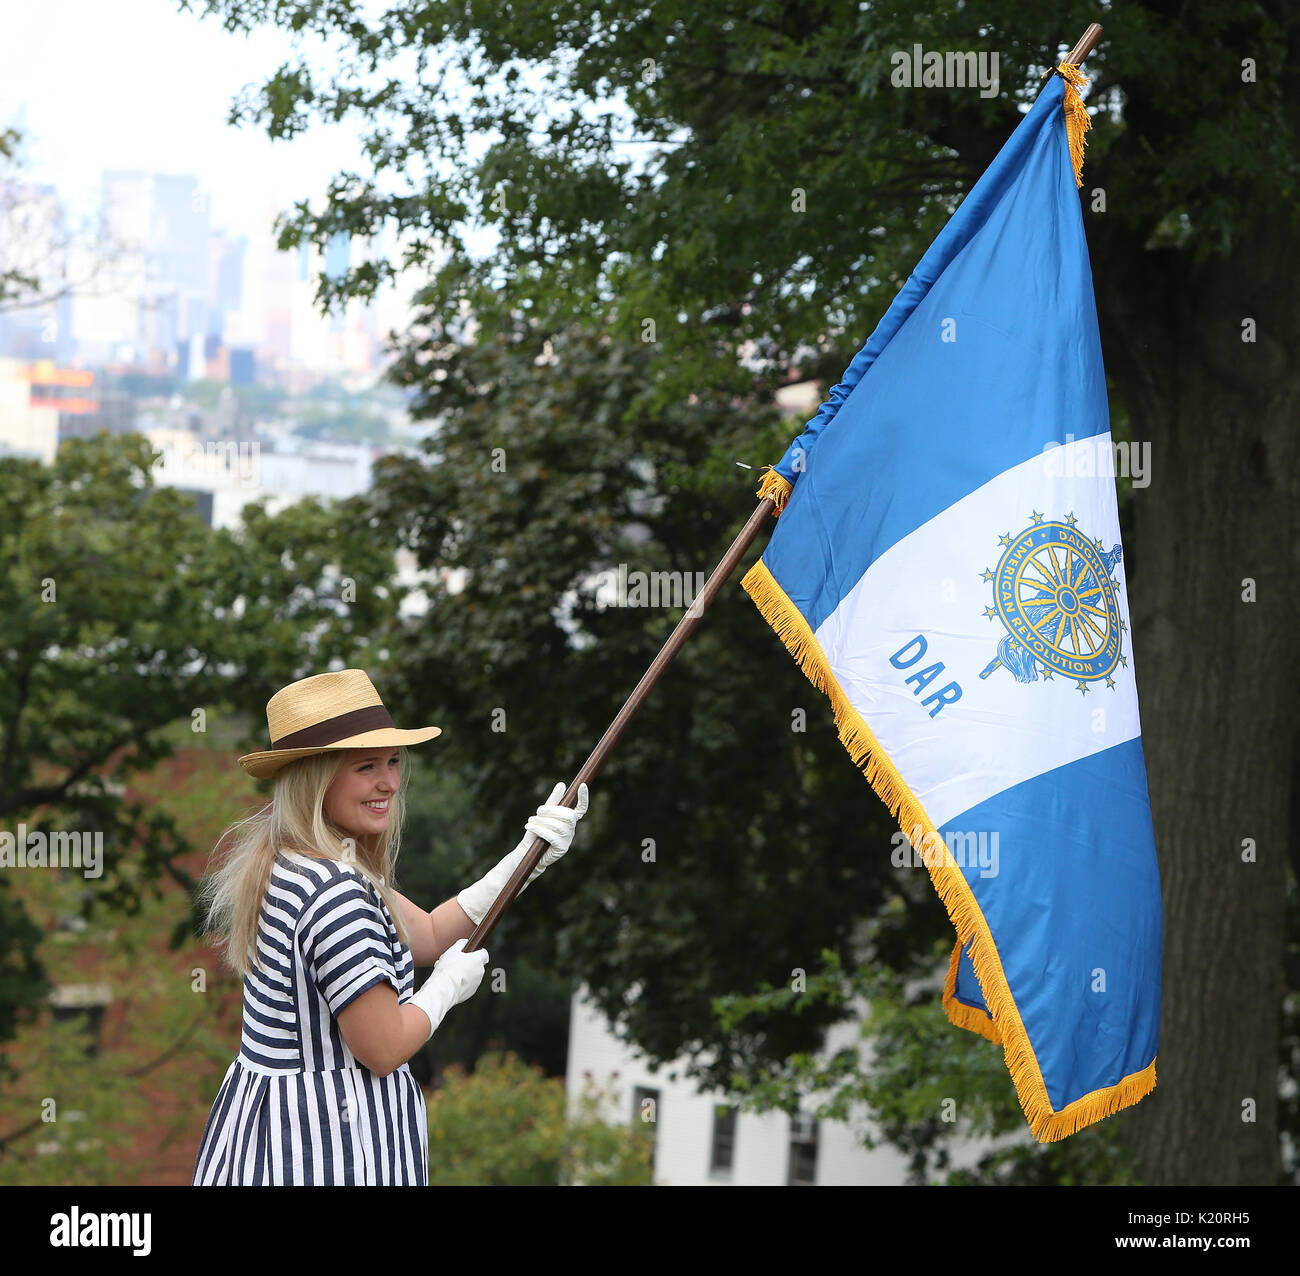 Brooklyn, United States. 27th Aug, 2017. DAR member with Flag. Green-Wood Cemetery in Brooklyn staged its annual Battle of Brooklyn recreation, complete with cannon & musket fire, with re-enactors wearing British & colonial period uniforms performing on the cemetery lawn. After the battle, troops led the way to Battle Hill where a brief ceremony took place, with wreaths put into place honoring the 400 Maryland infantry who endured some 70% casualties attacking British positions on the hill top. Credit: Andy Katz/Pacific Press/Alamy Live News Stock Photo